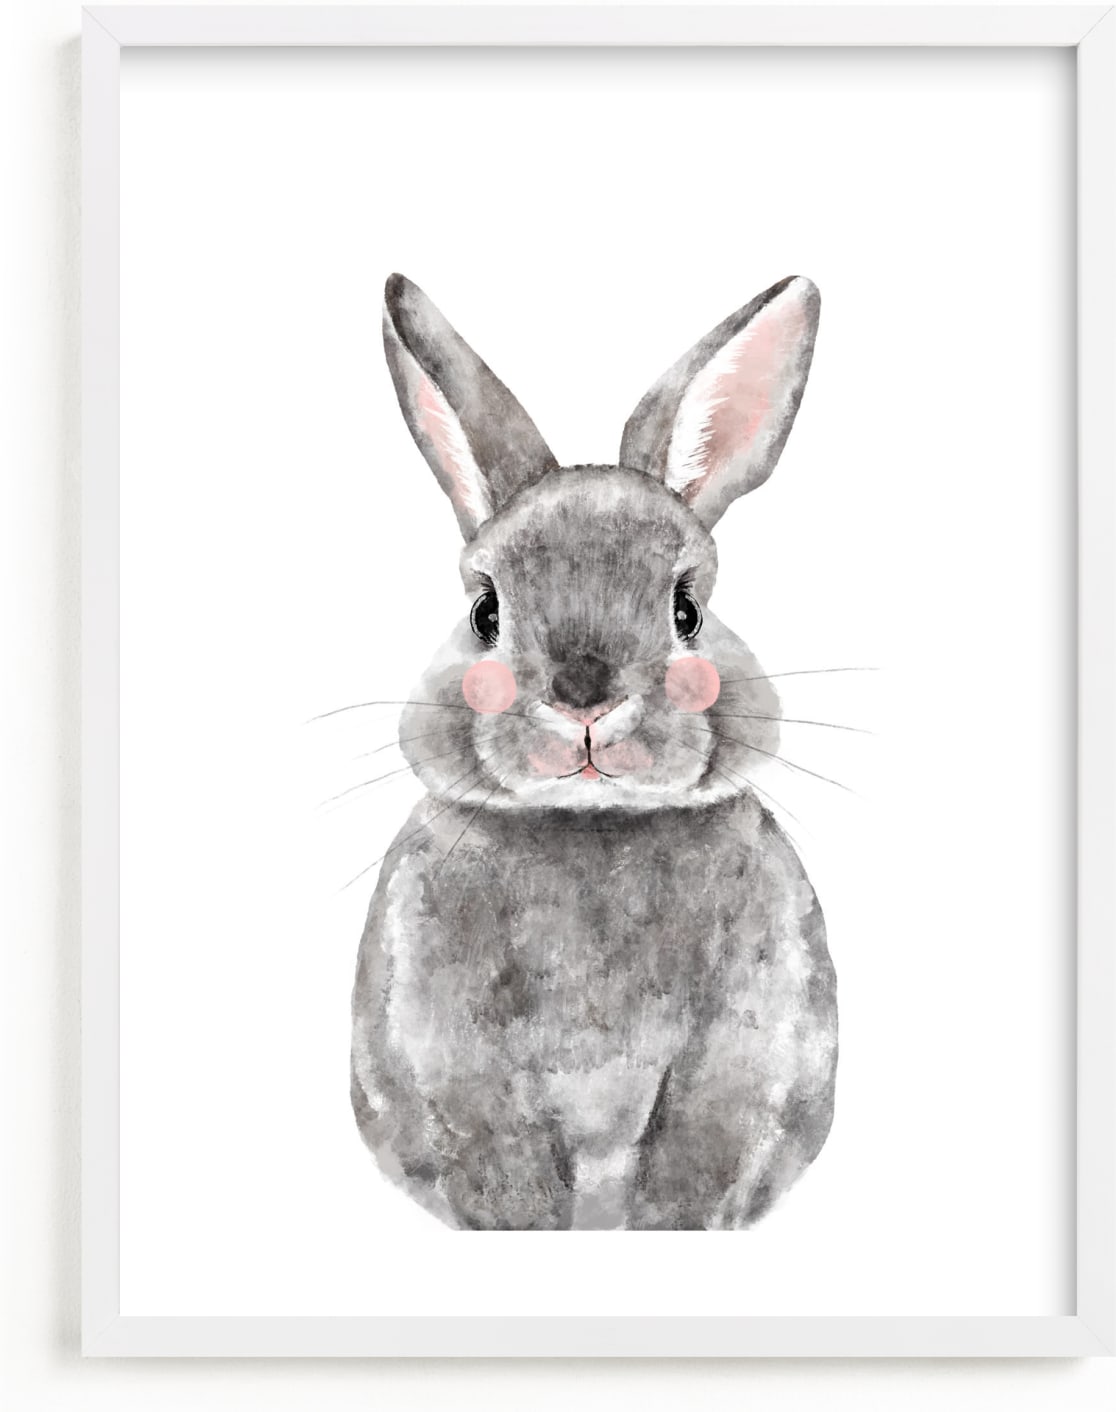 This is a white art by Cass Loh called Baby Animal Rabbit.